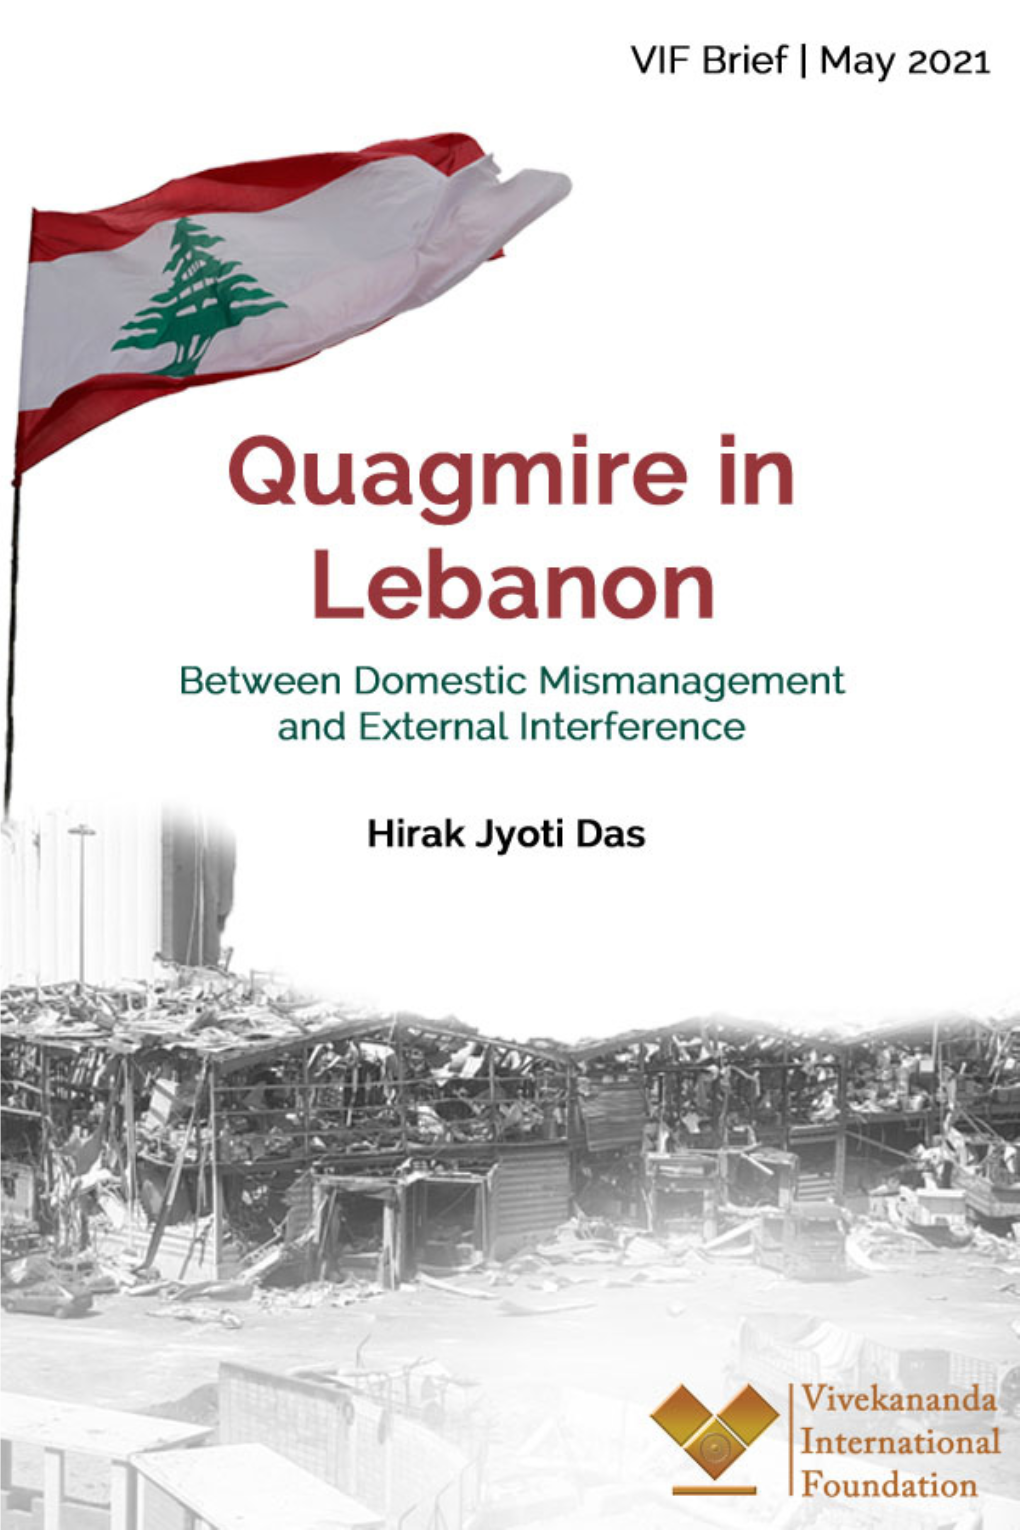 Quagmire in Lebanon: Between Domestic Mismanagement and External Interference